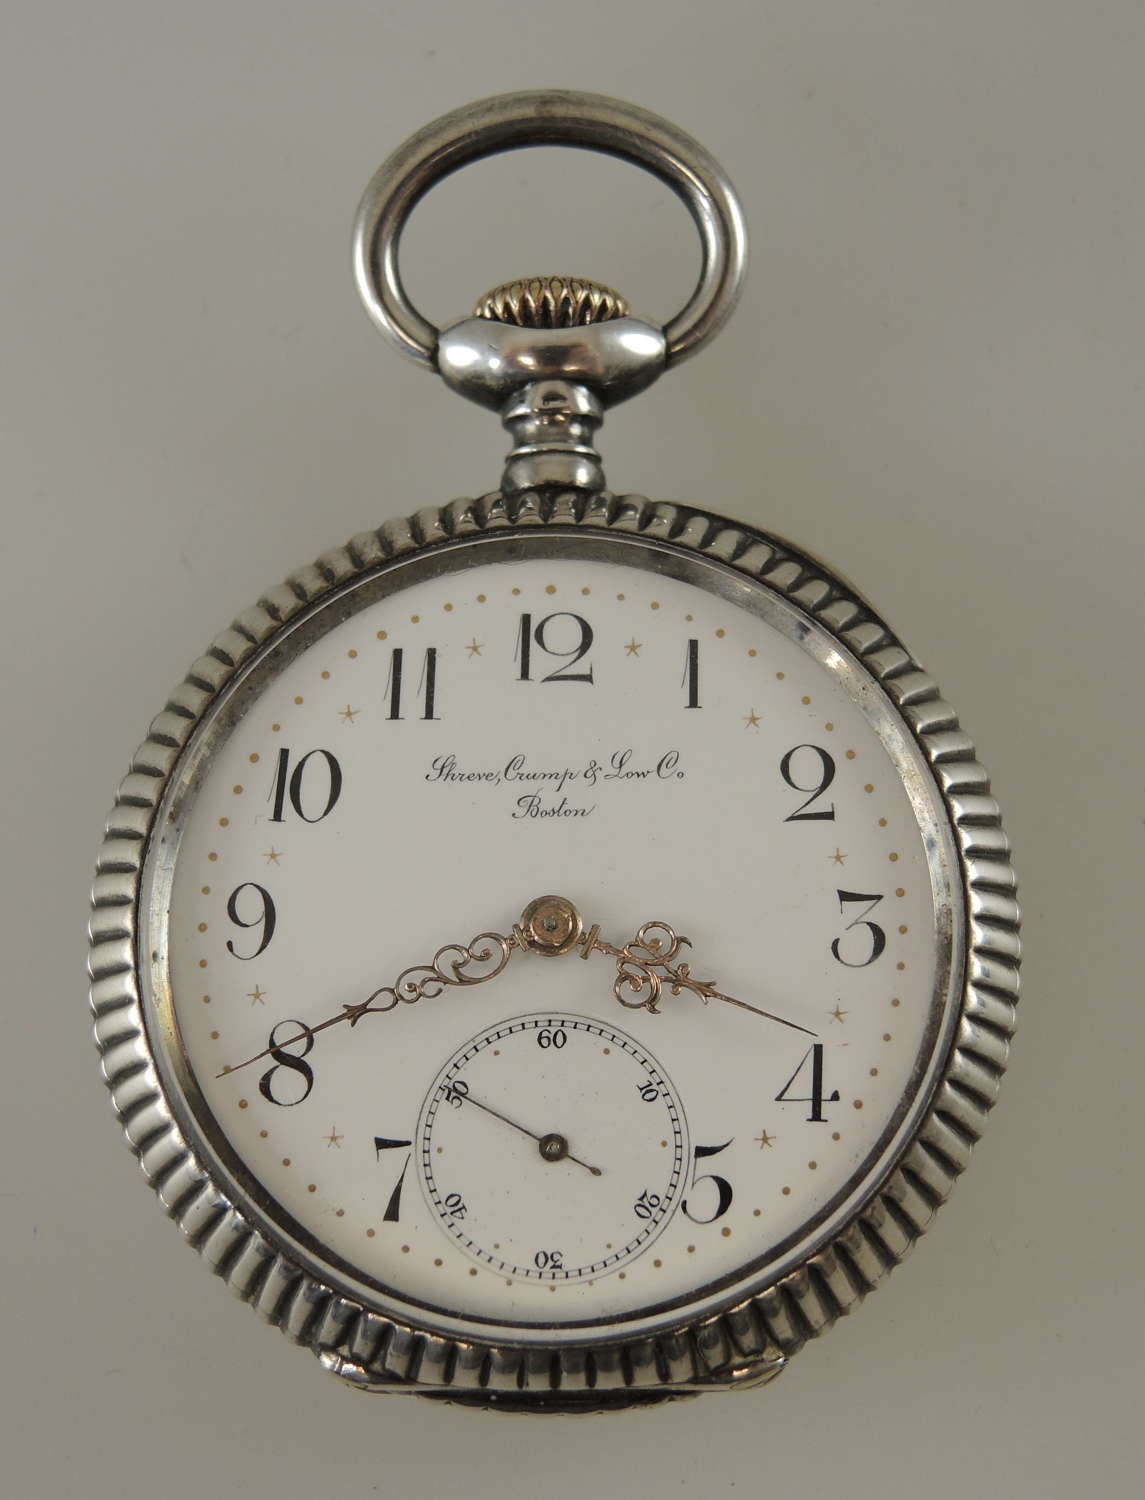 Unusual silver cased pocket watch. Sold by Shreve, Crump & Low, Boston